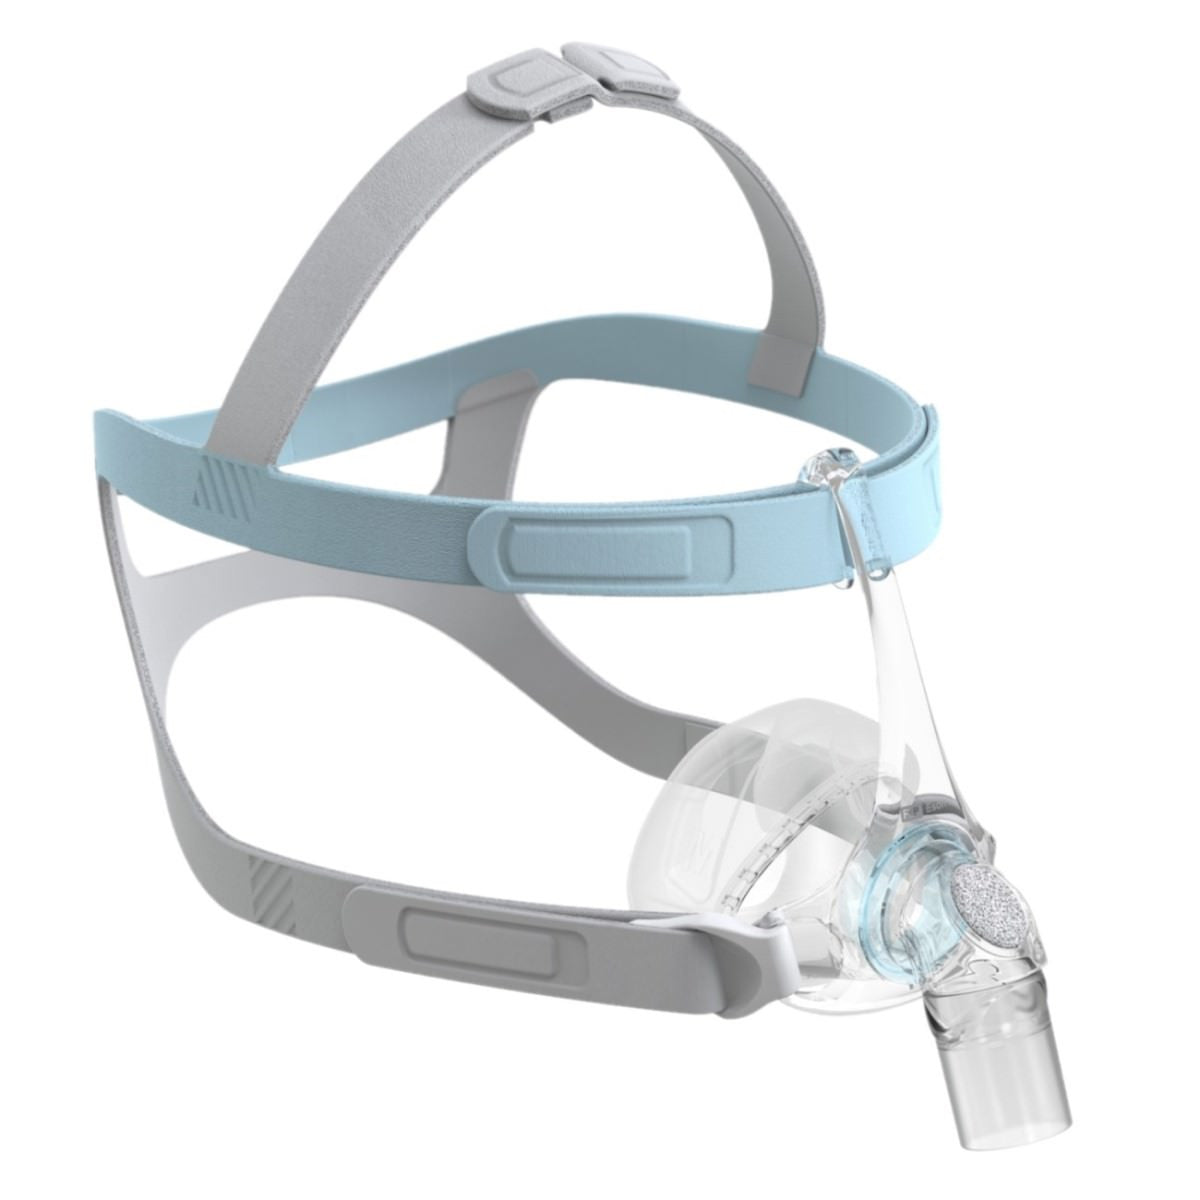 Replacement Swivel connects tube to cushion on Fisher and Paykel ESON 2 Nasal Mask, Brevida and Vitera masks